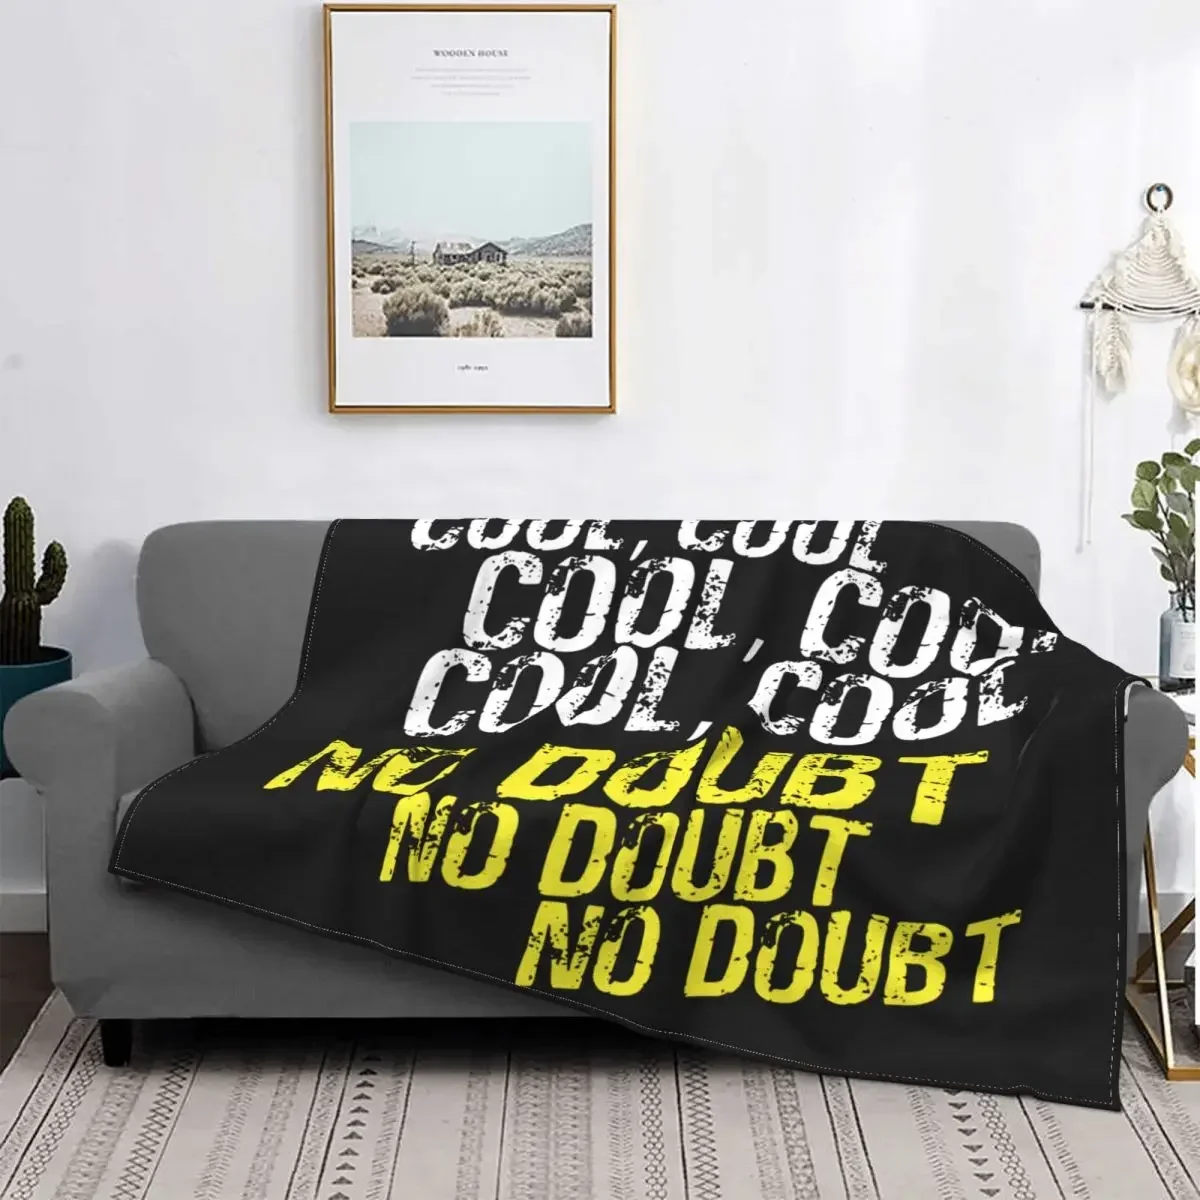 

Cool No Doubt Knitted Blankets Brooklyn Nine Nine 99 Jake Peralta Flannel Throw Blankets Summer Air Conditioning Warm Bedspread